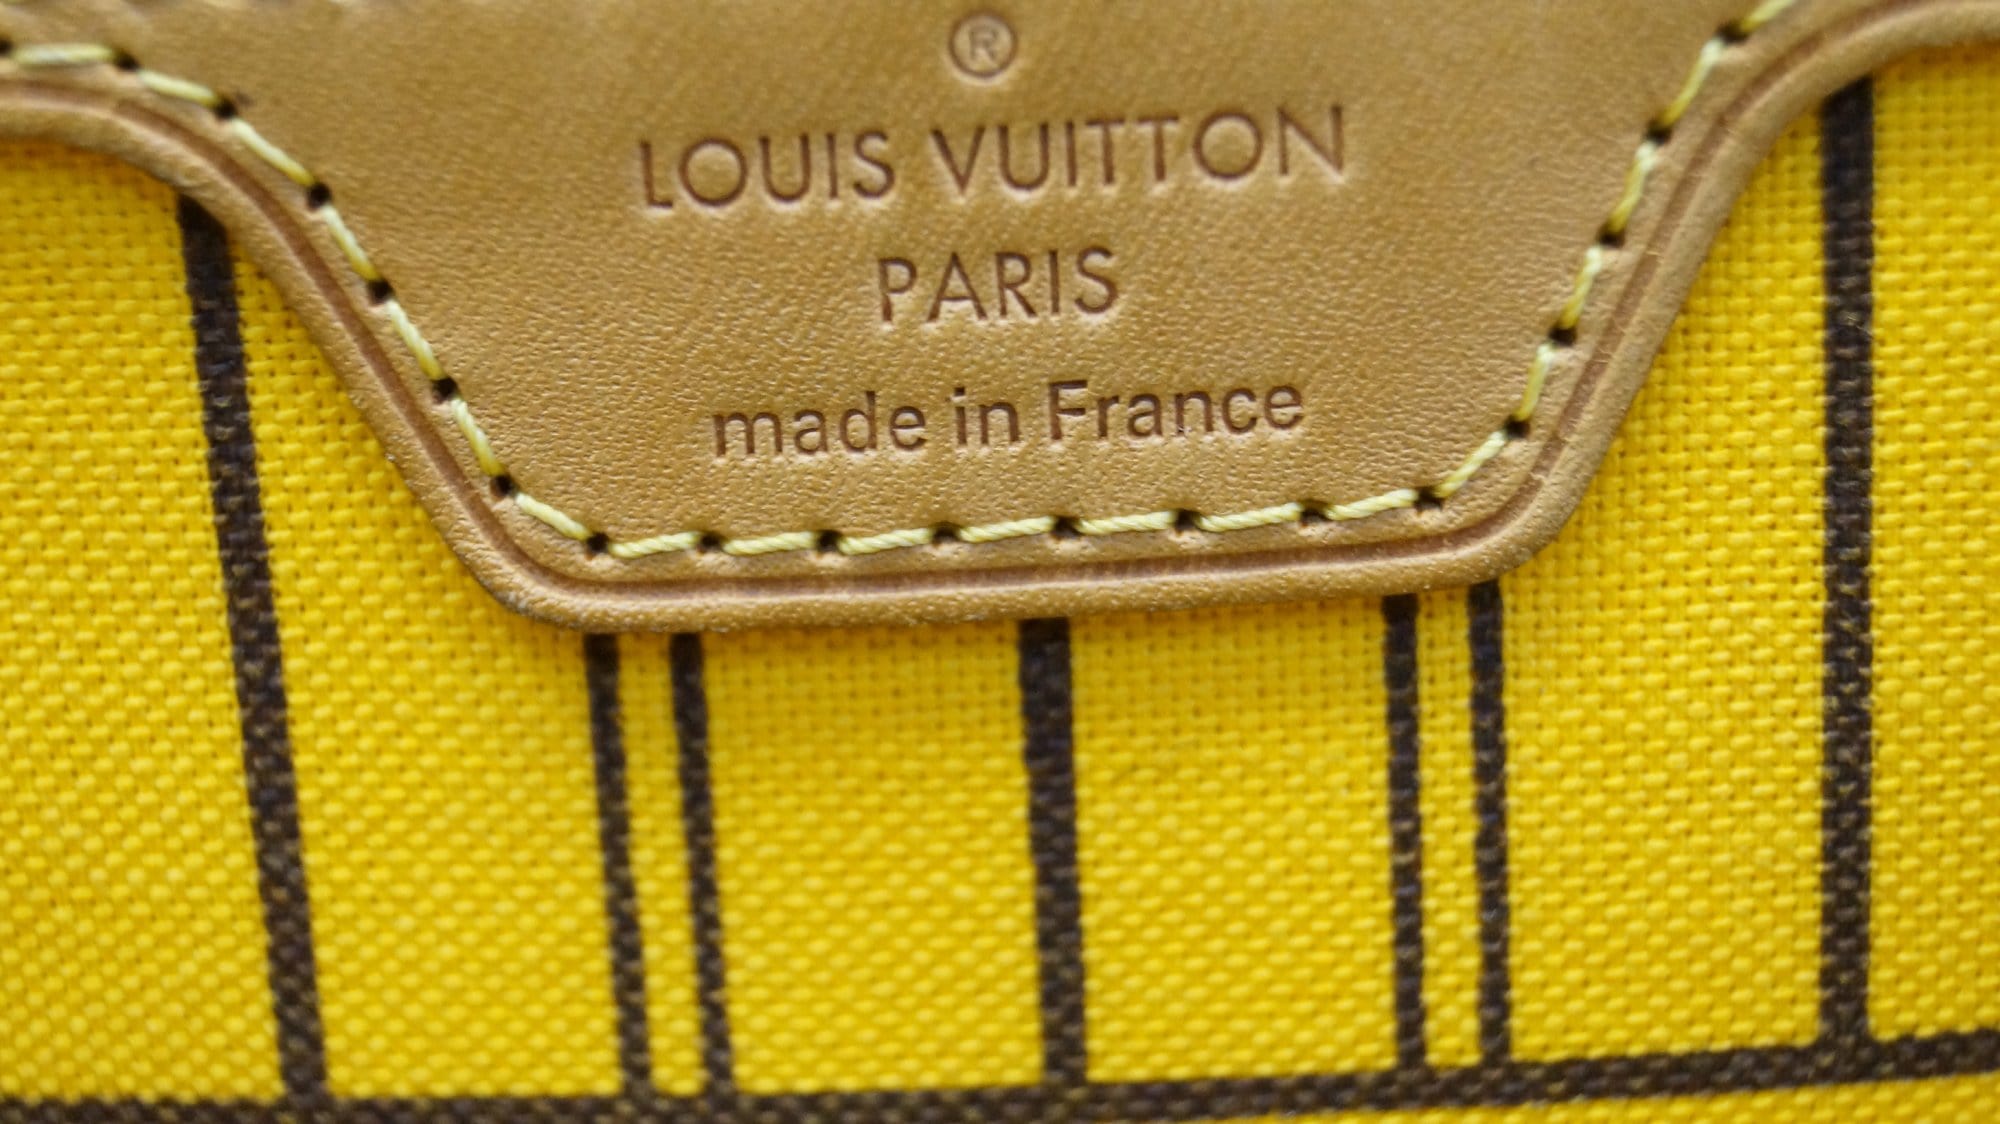 Louis Vuitton Neverfull MM Bag Monogram Canvas In Gradient Pink Yellow -  Praise To Heaven